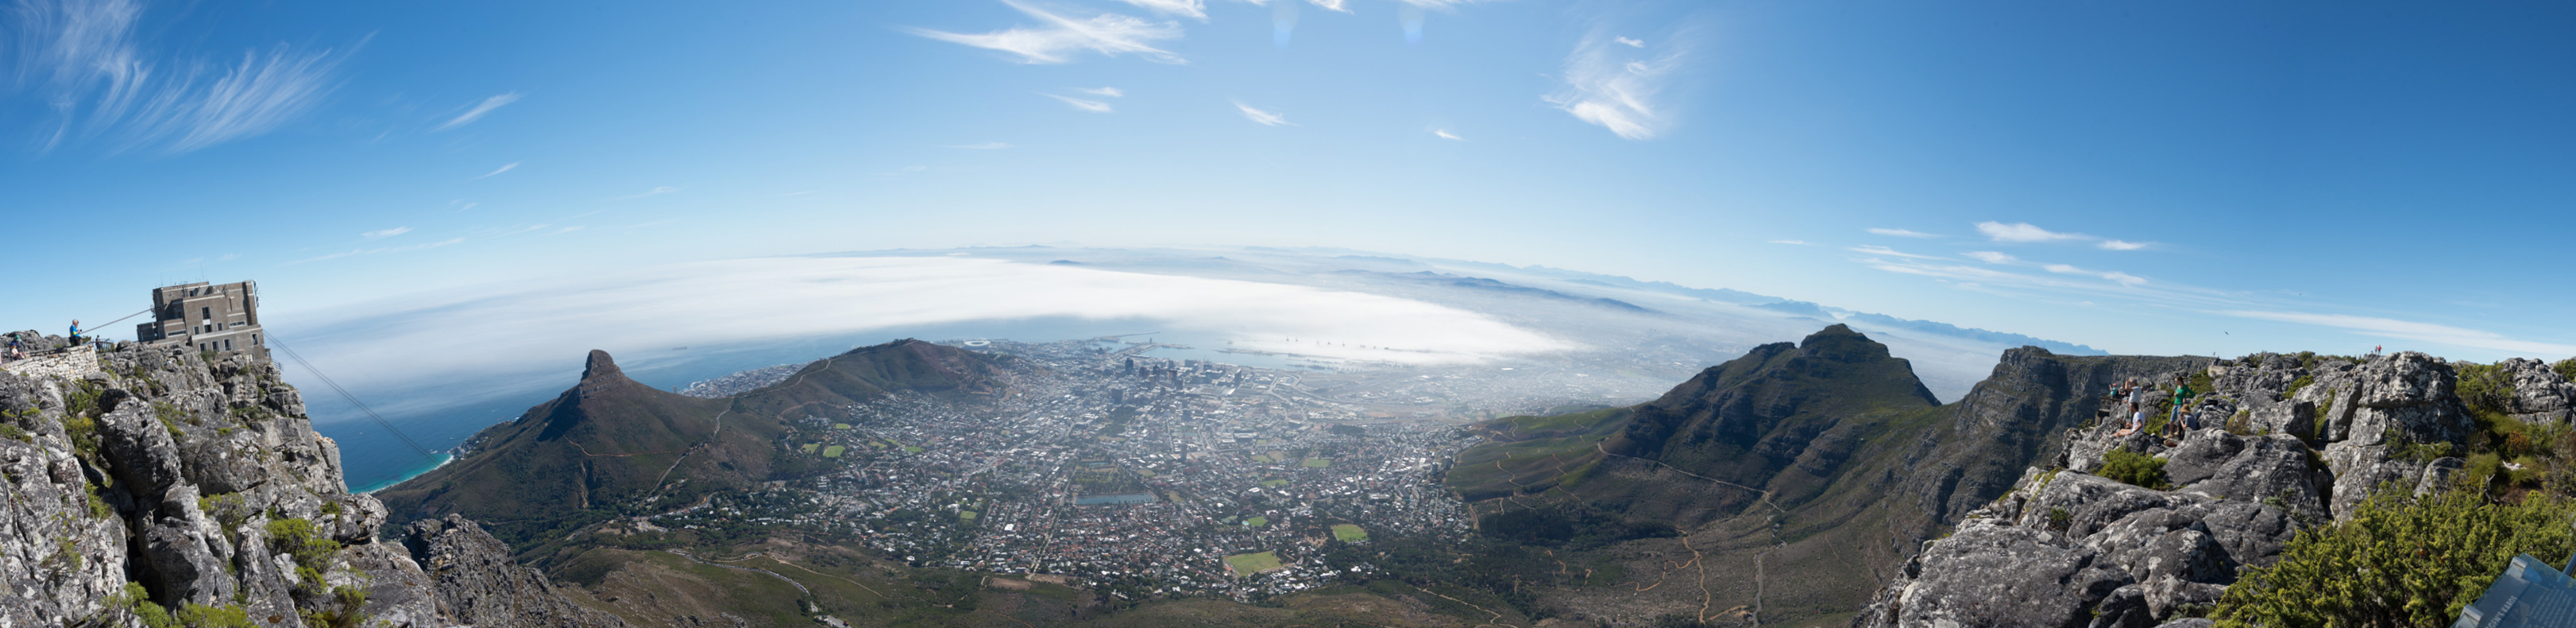 A quick panorama from the top of table mountain.